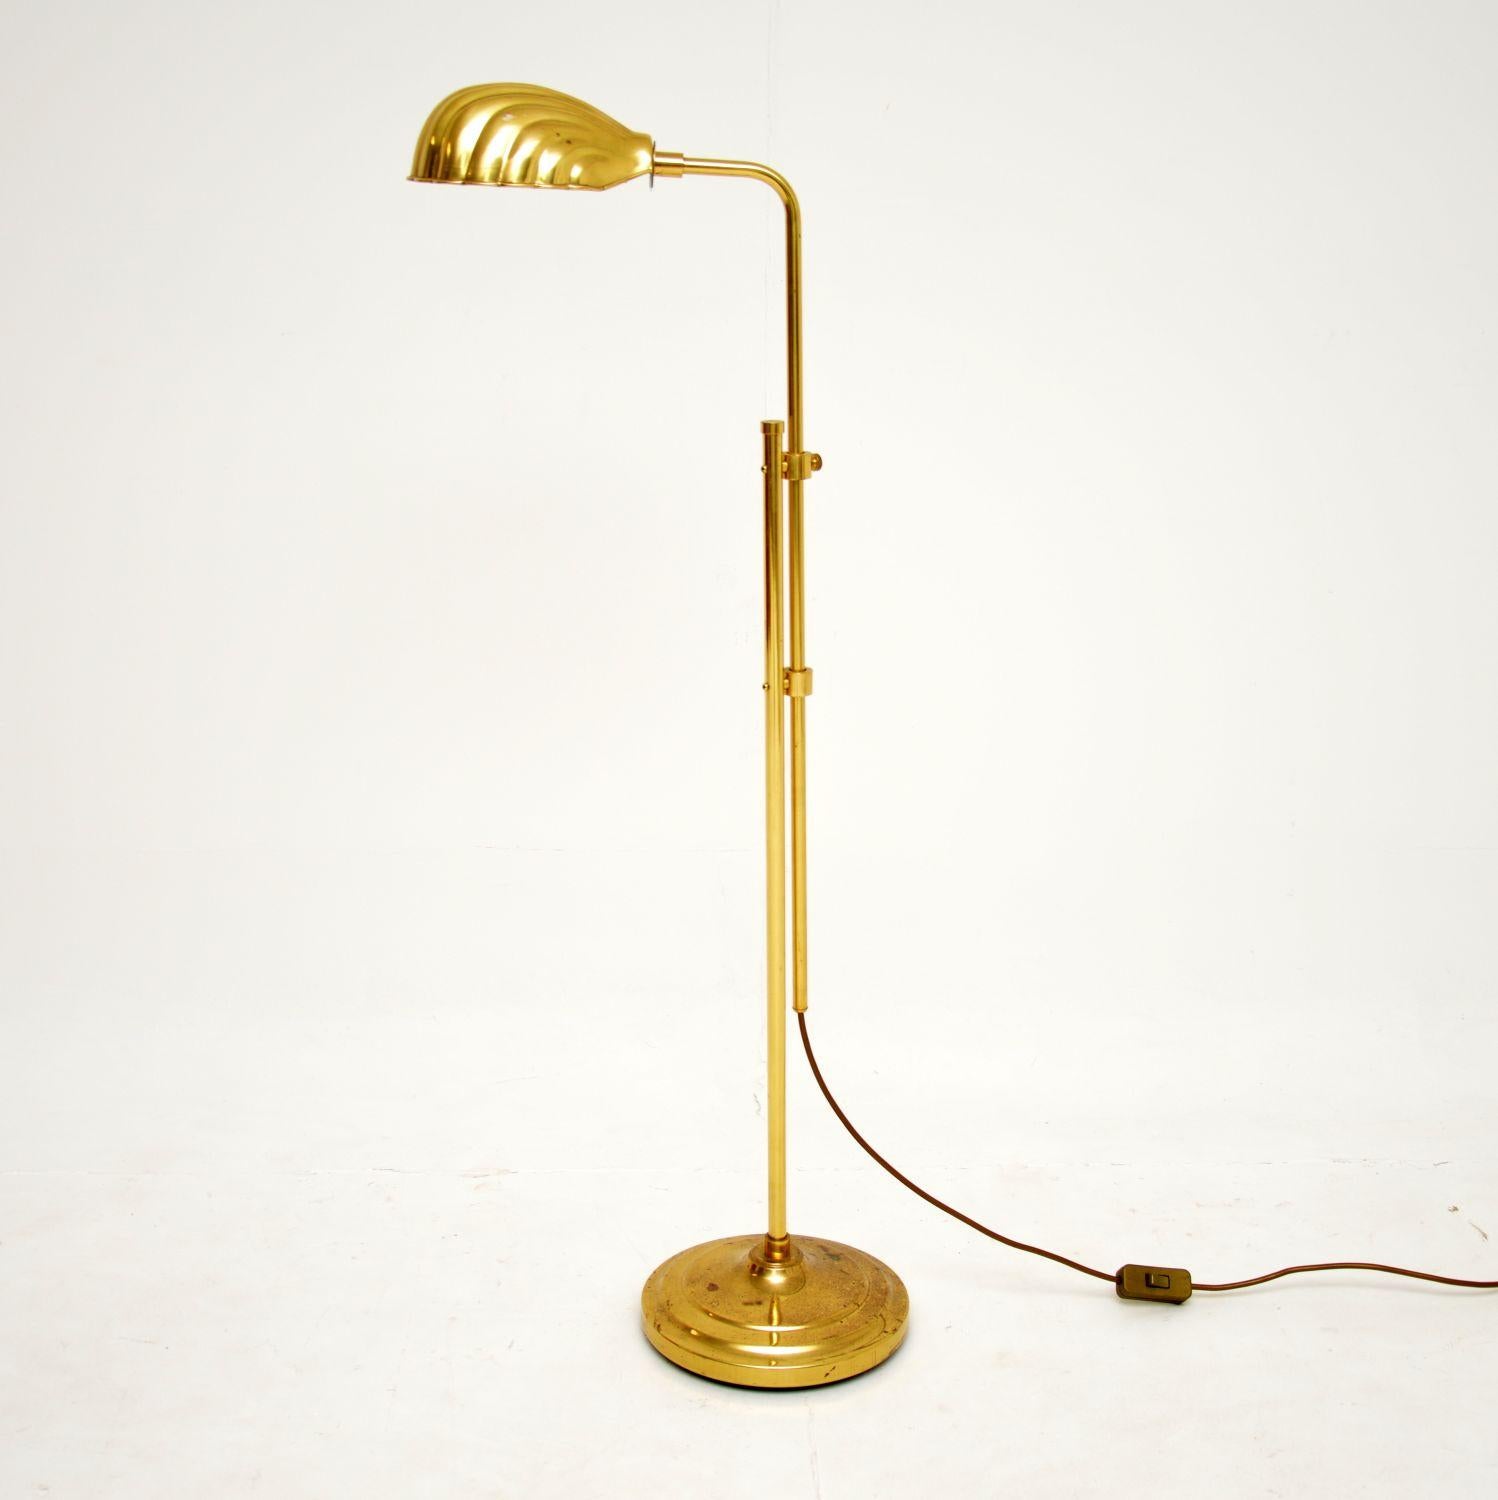 A stylish and very well made vintage rise and fall floor lamp in brass. This was made in England, it dates from the 1970’s.

It is of lovely quality, with a clam shell shade, this has a smart mechanism to raise and lower it.

It is in great vintage